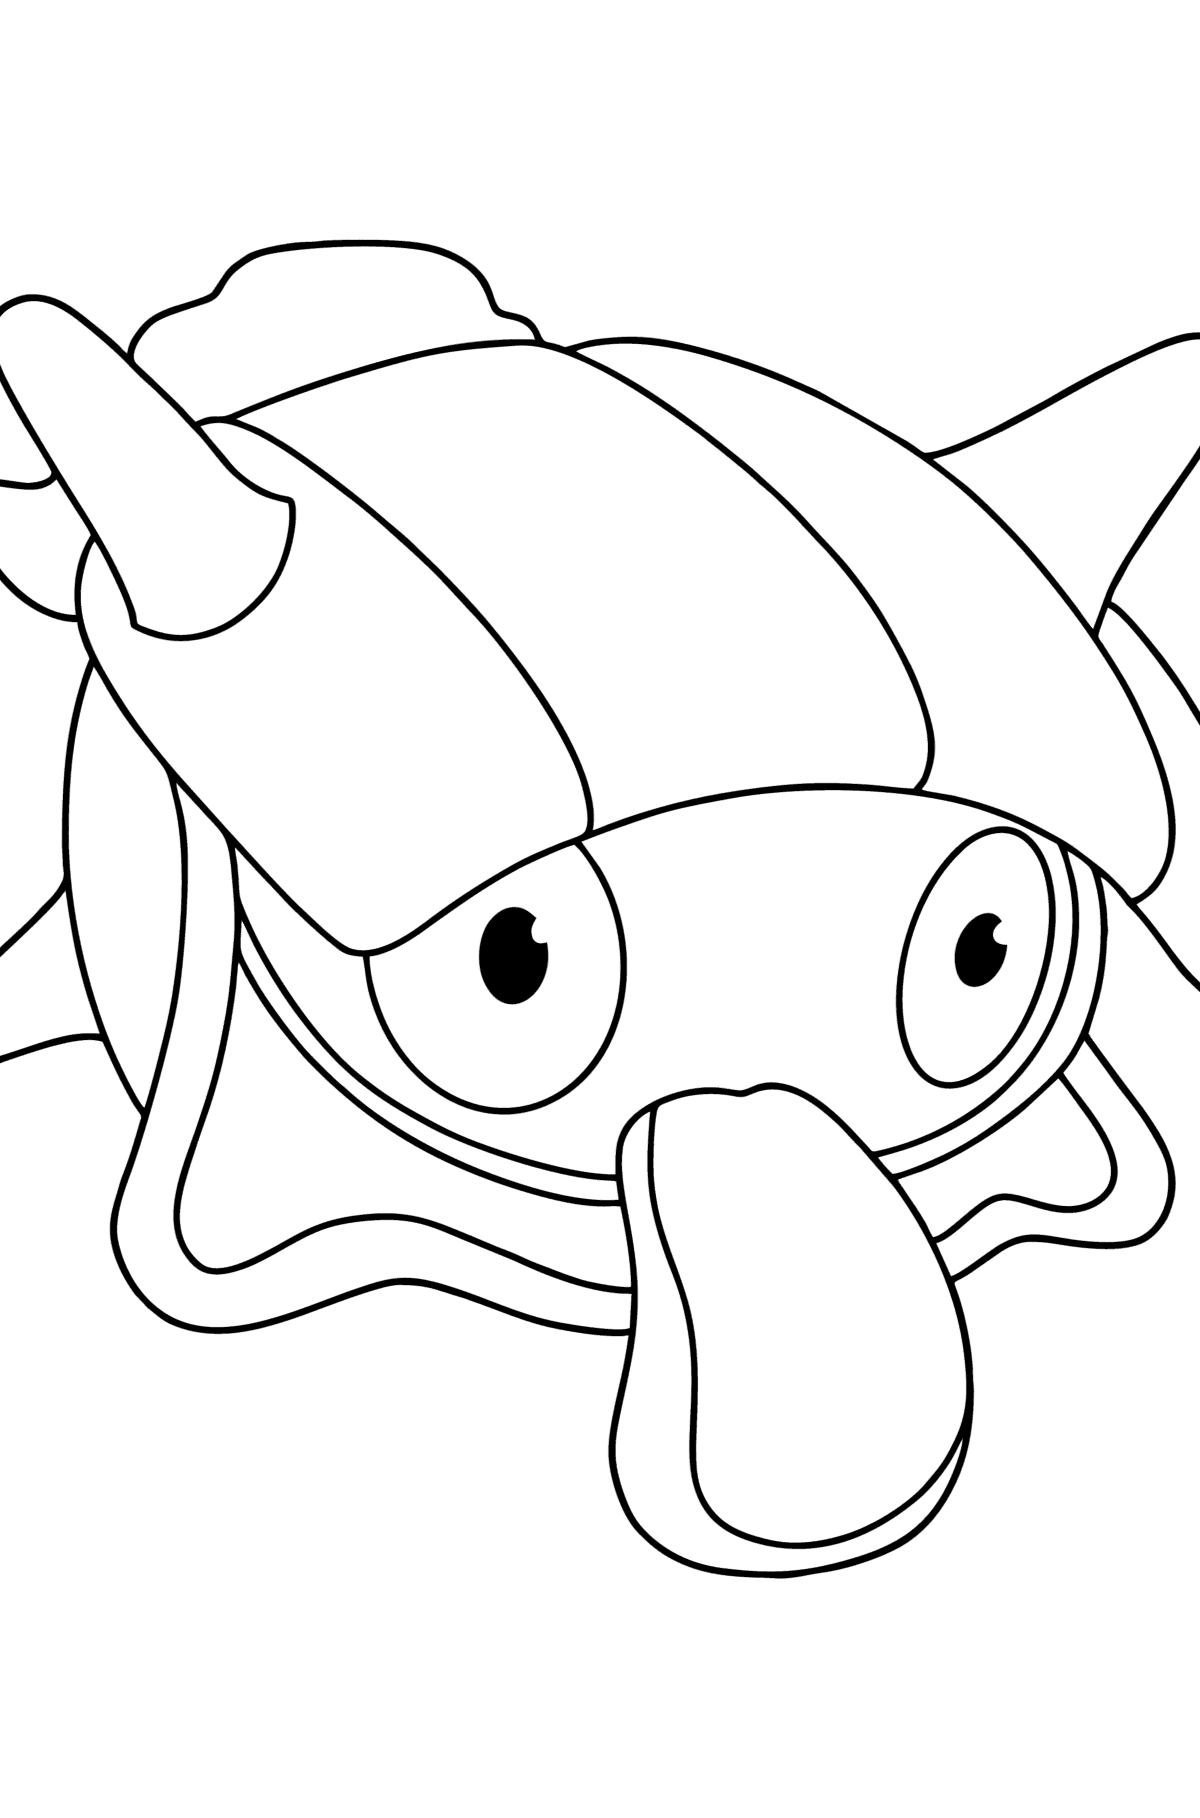 Colouring page Pokémon X and Y Shellder - Coloring Pages for Kids